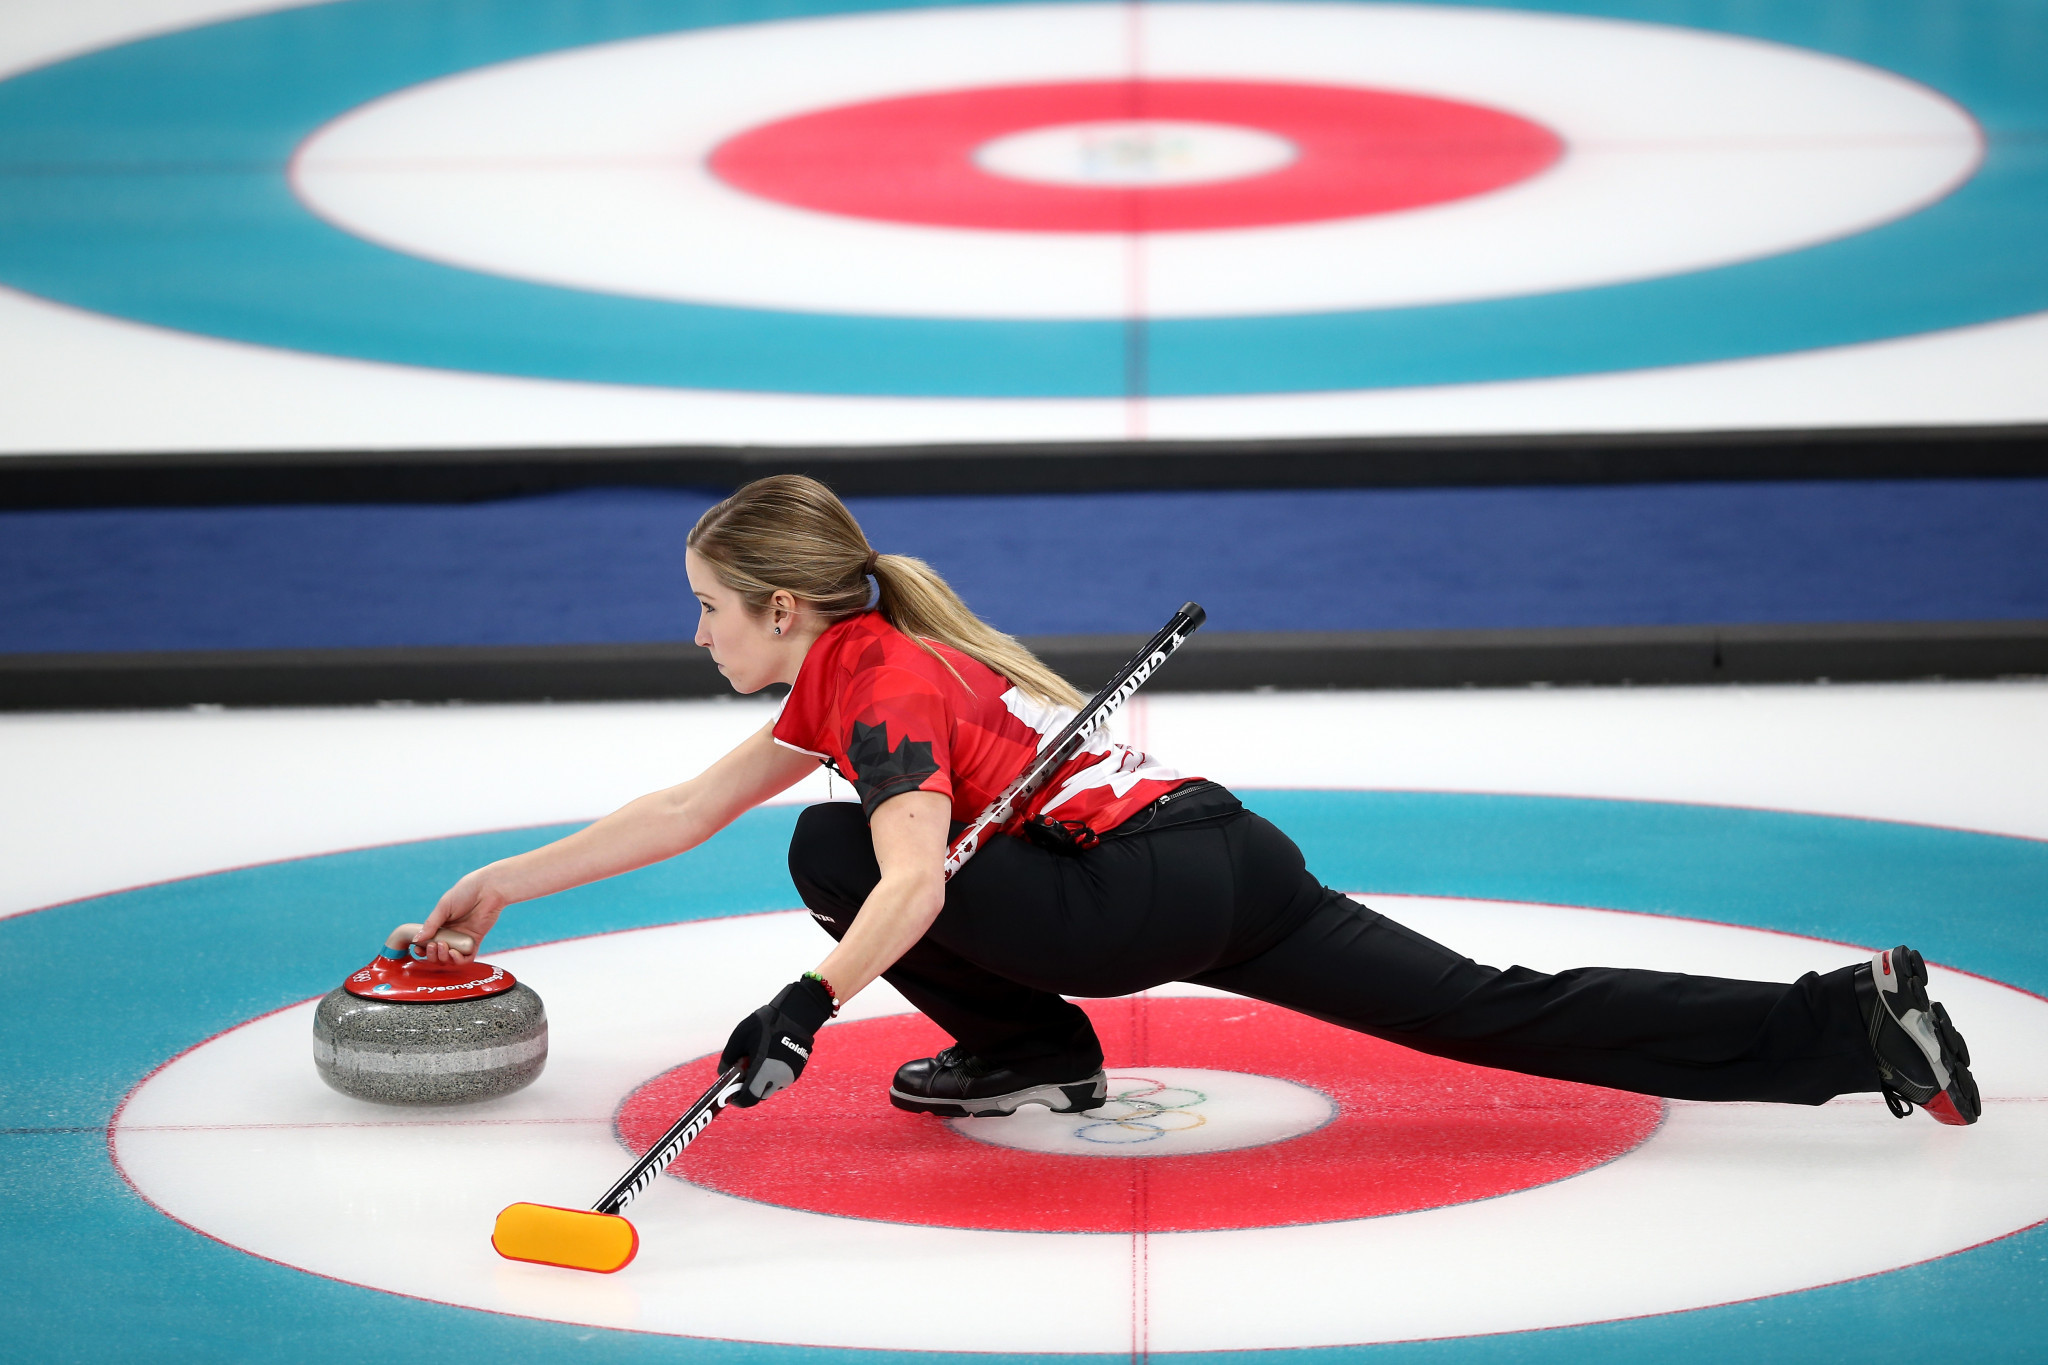 Canadian duo Kaitlyn Lawes and John Morris became the first team to win an Olympic Games mixed doubles curling gold medal ©Getty Images